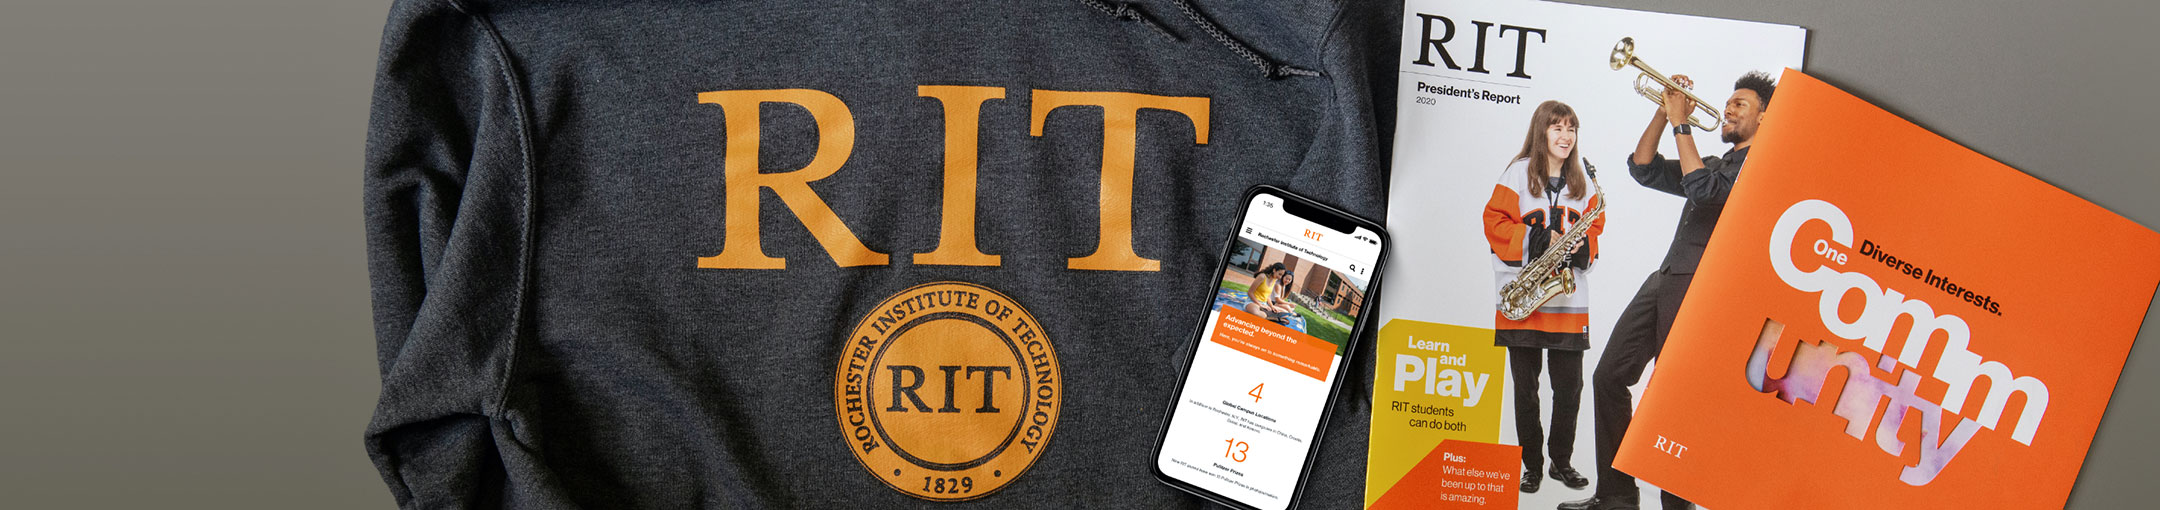 Overhead view of RIT branded gear